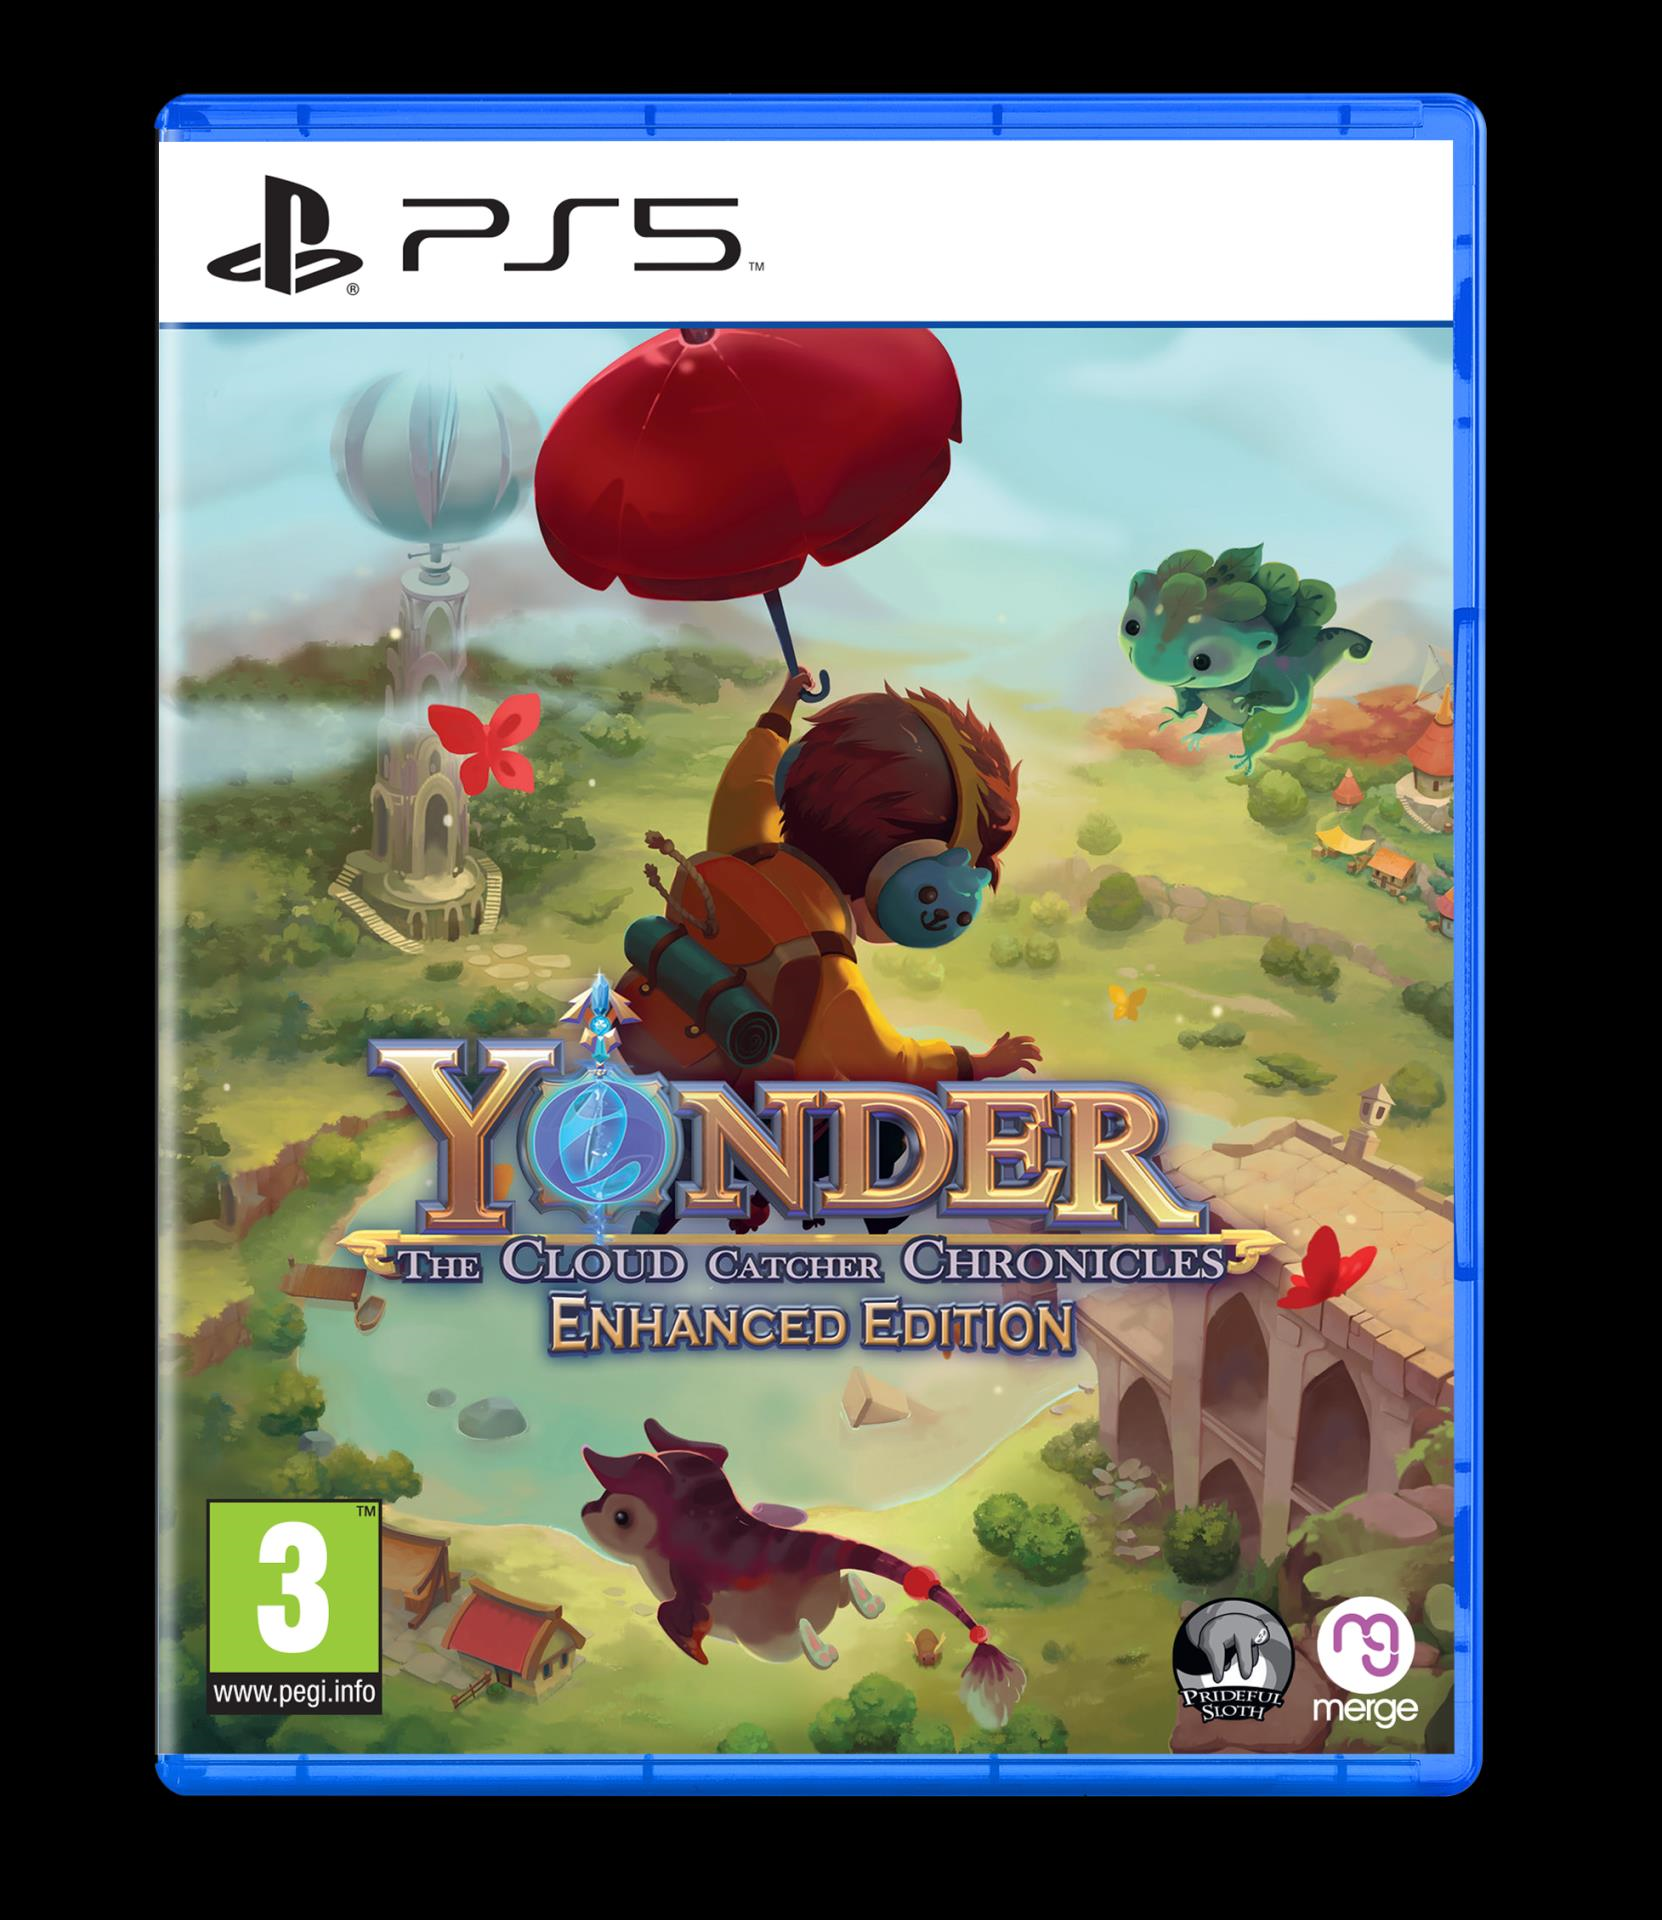 Yonder The Cloud Catcher Chronicles Enhanced Edition